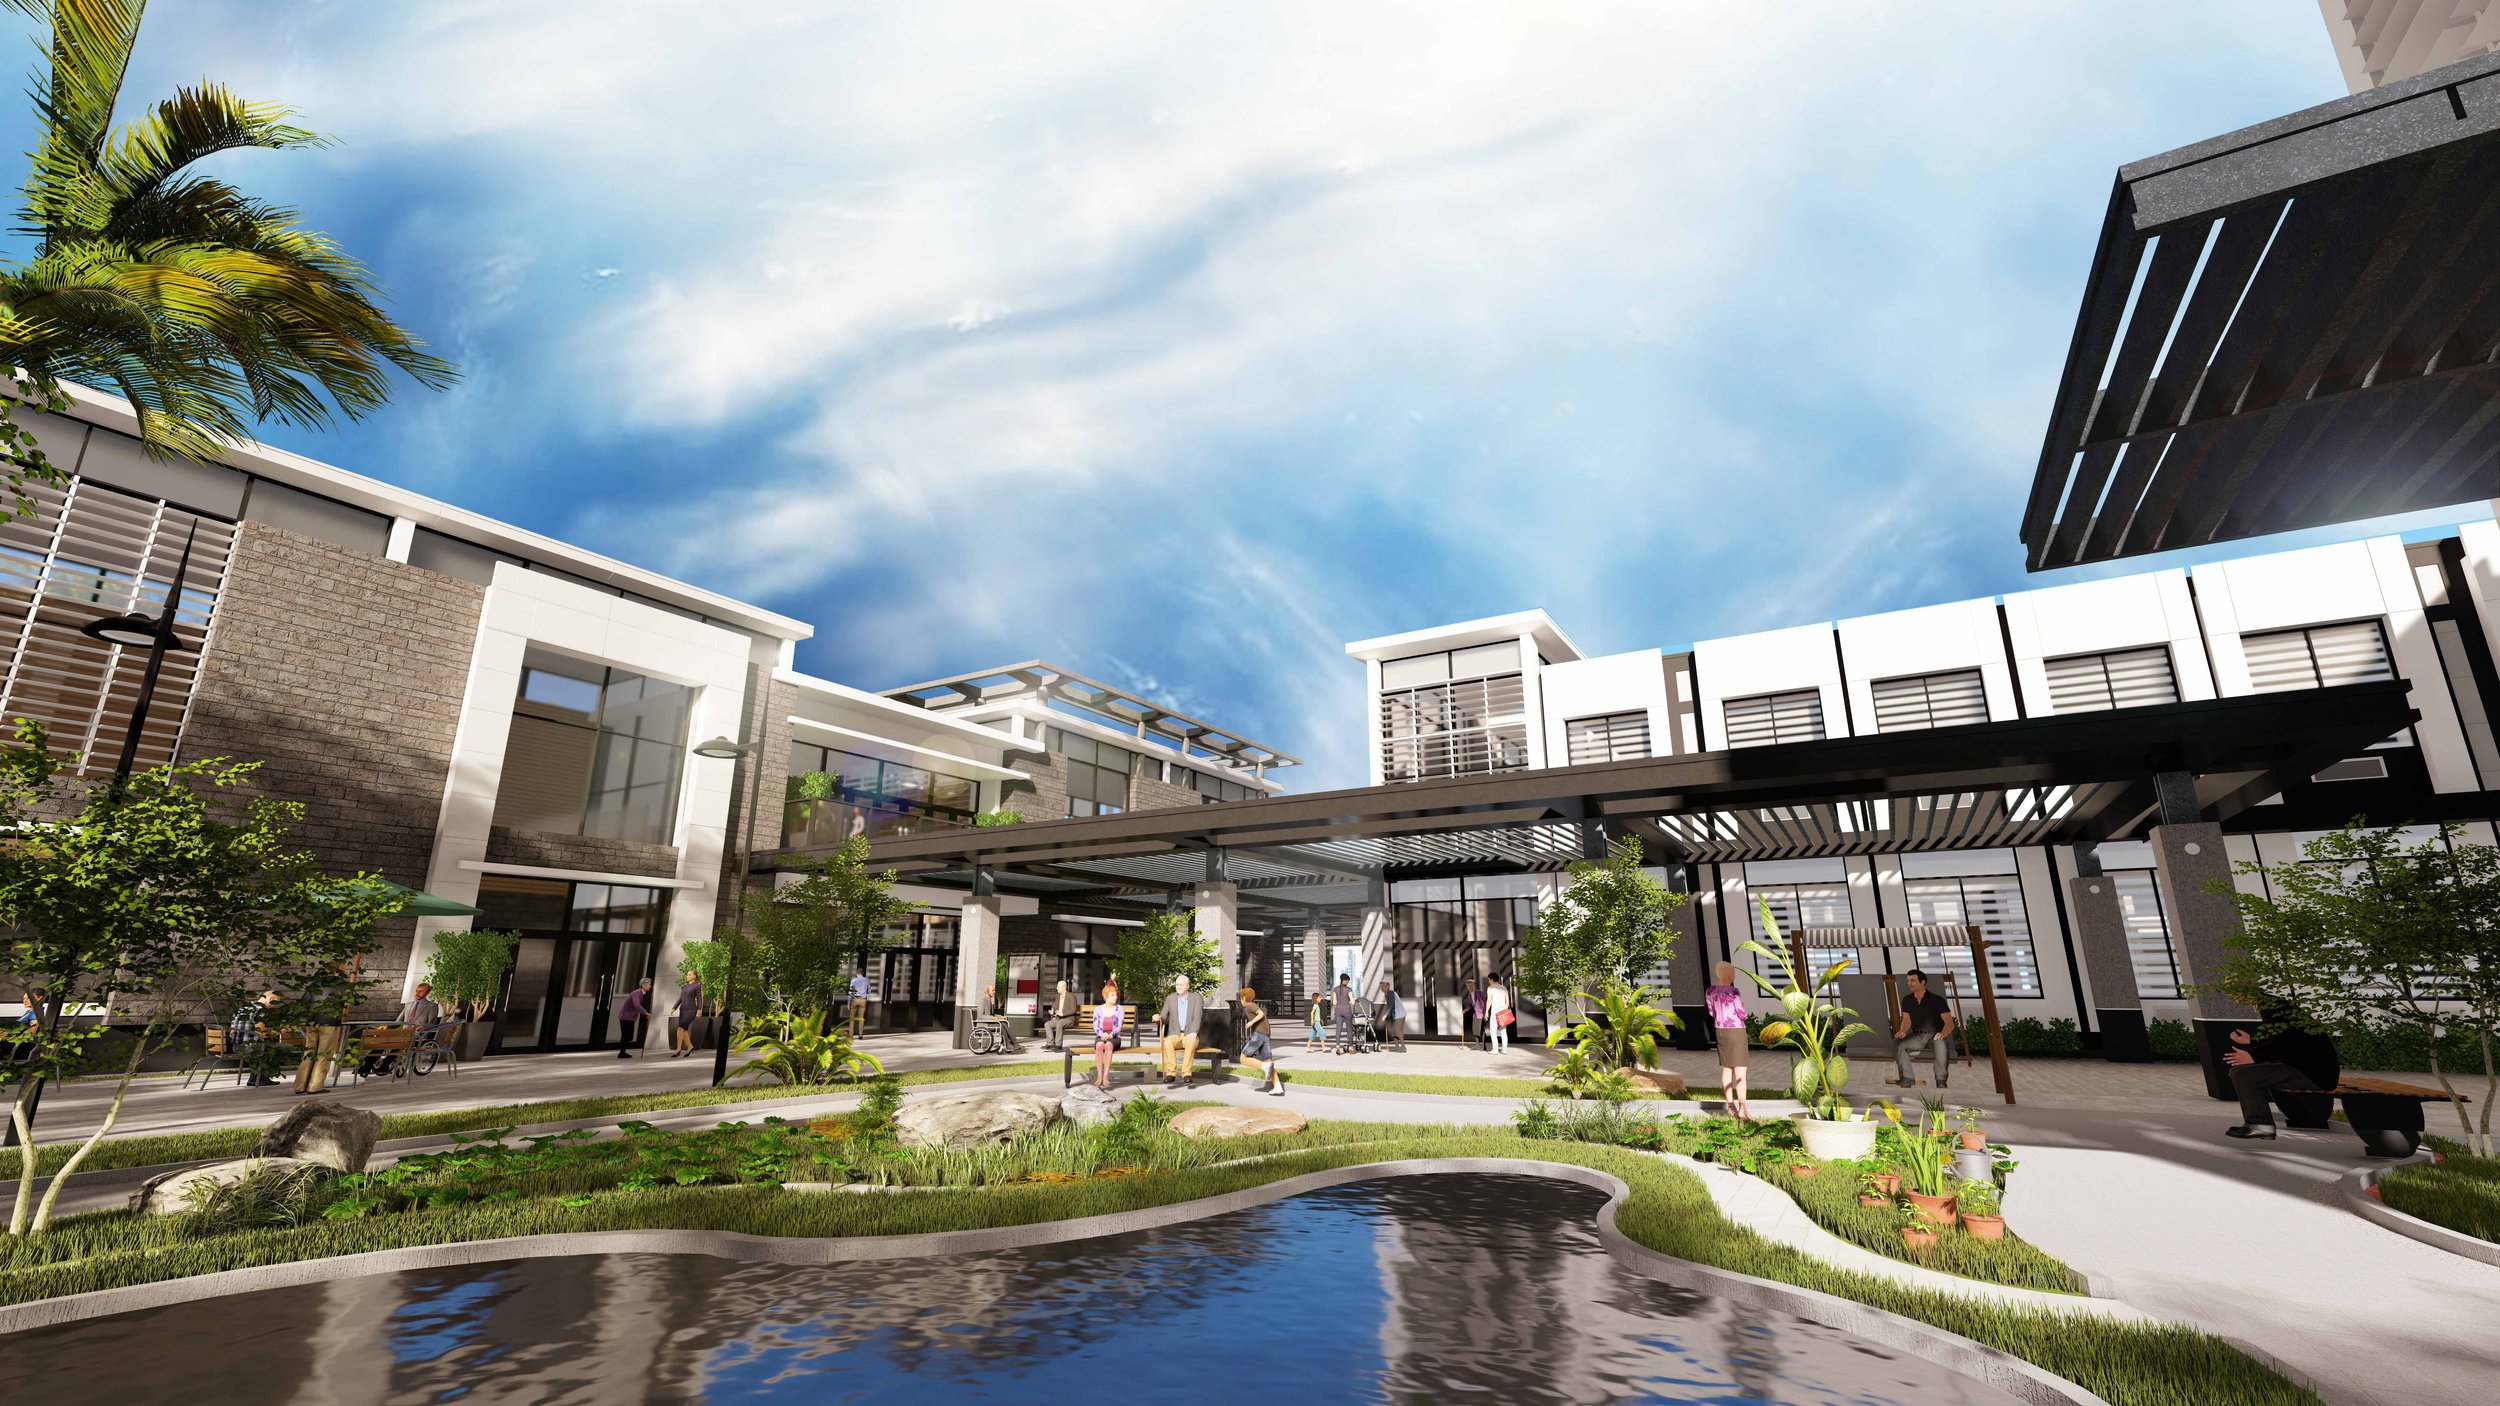  Conceptual rendering of a Wellness Community project by AD&amp;V. 